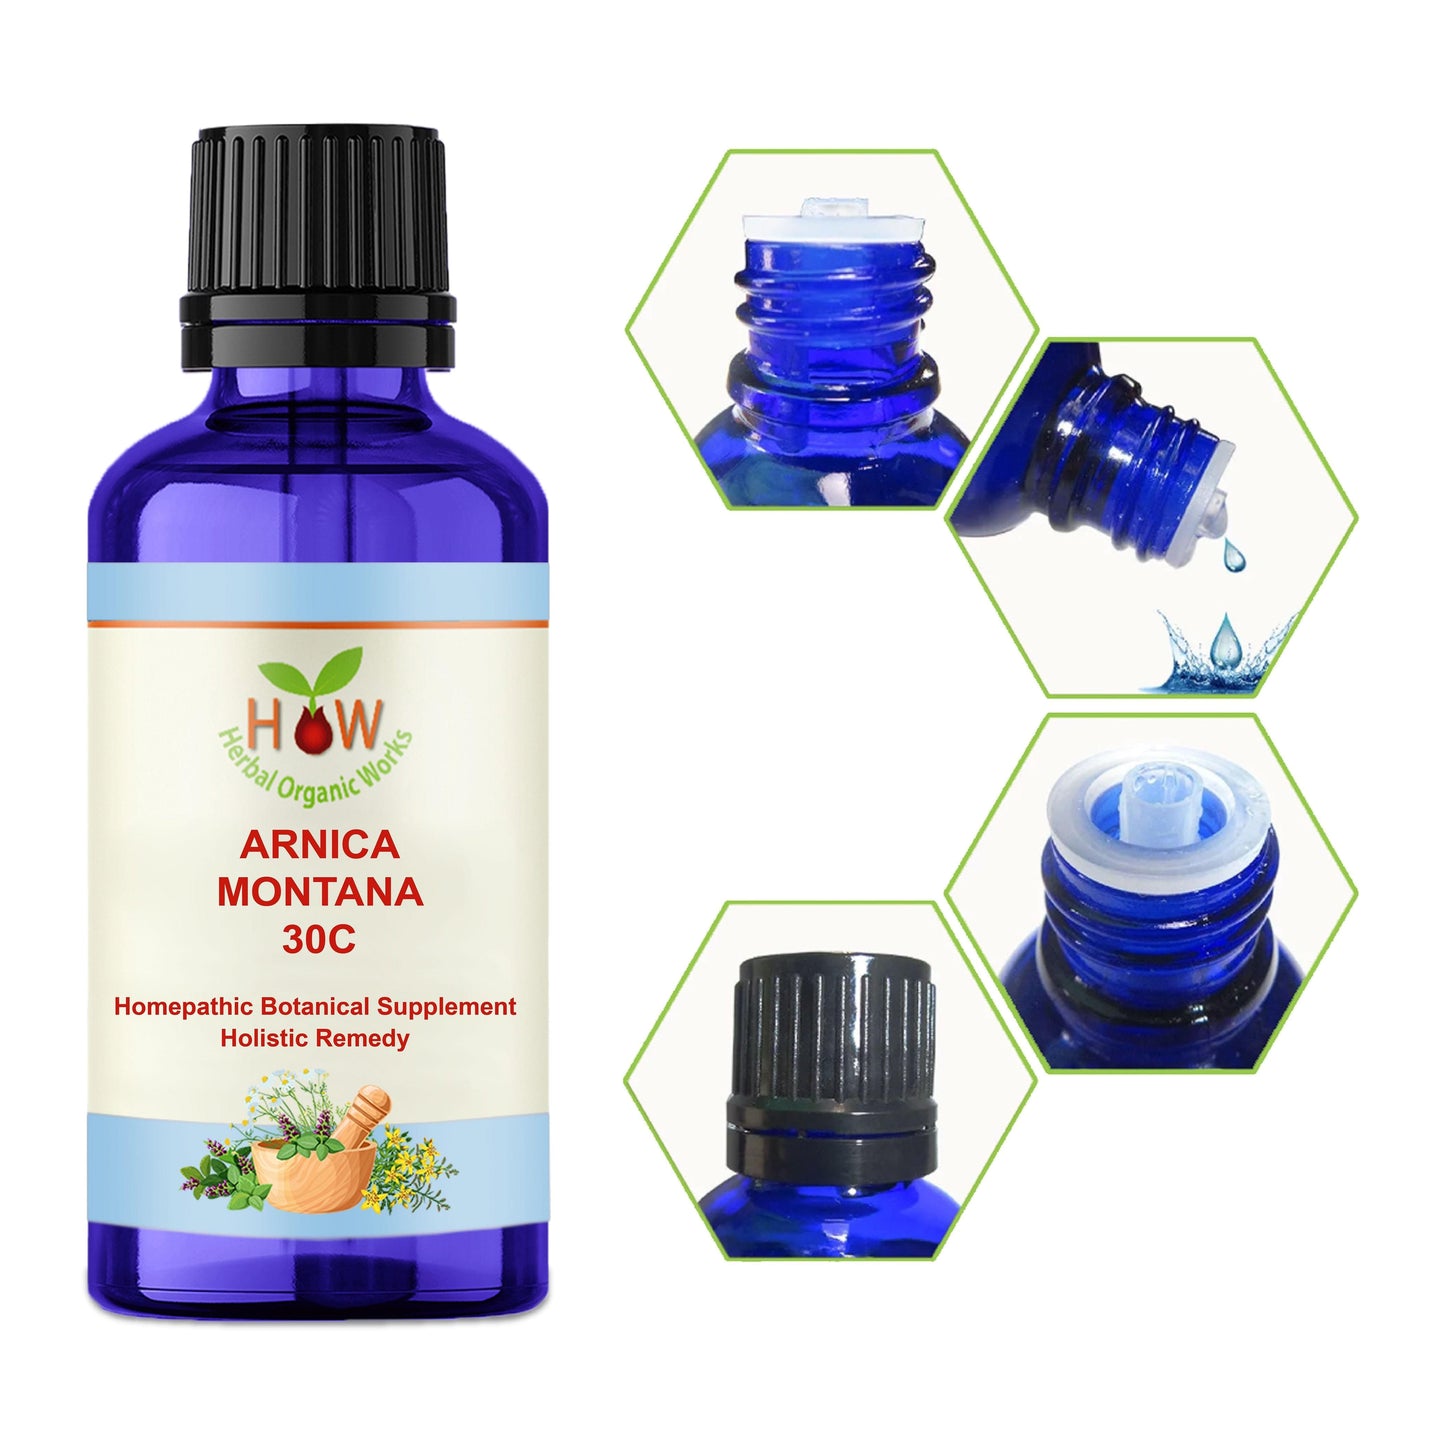 ARNICA MONTANA 30C | INJURIES AND MUSCLE PAIN